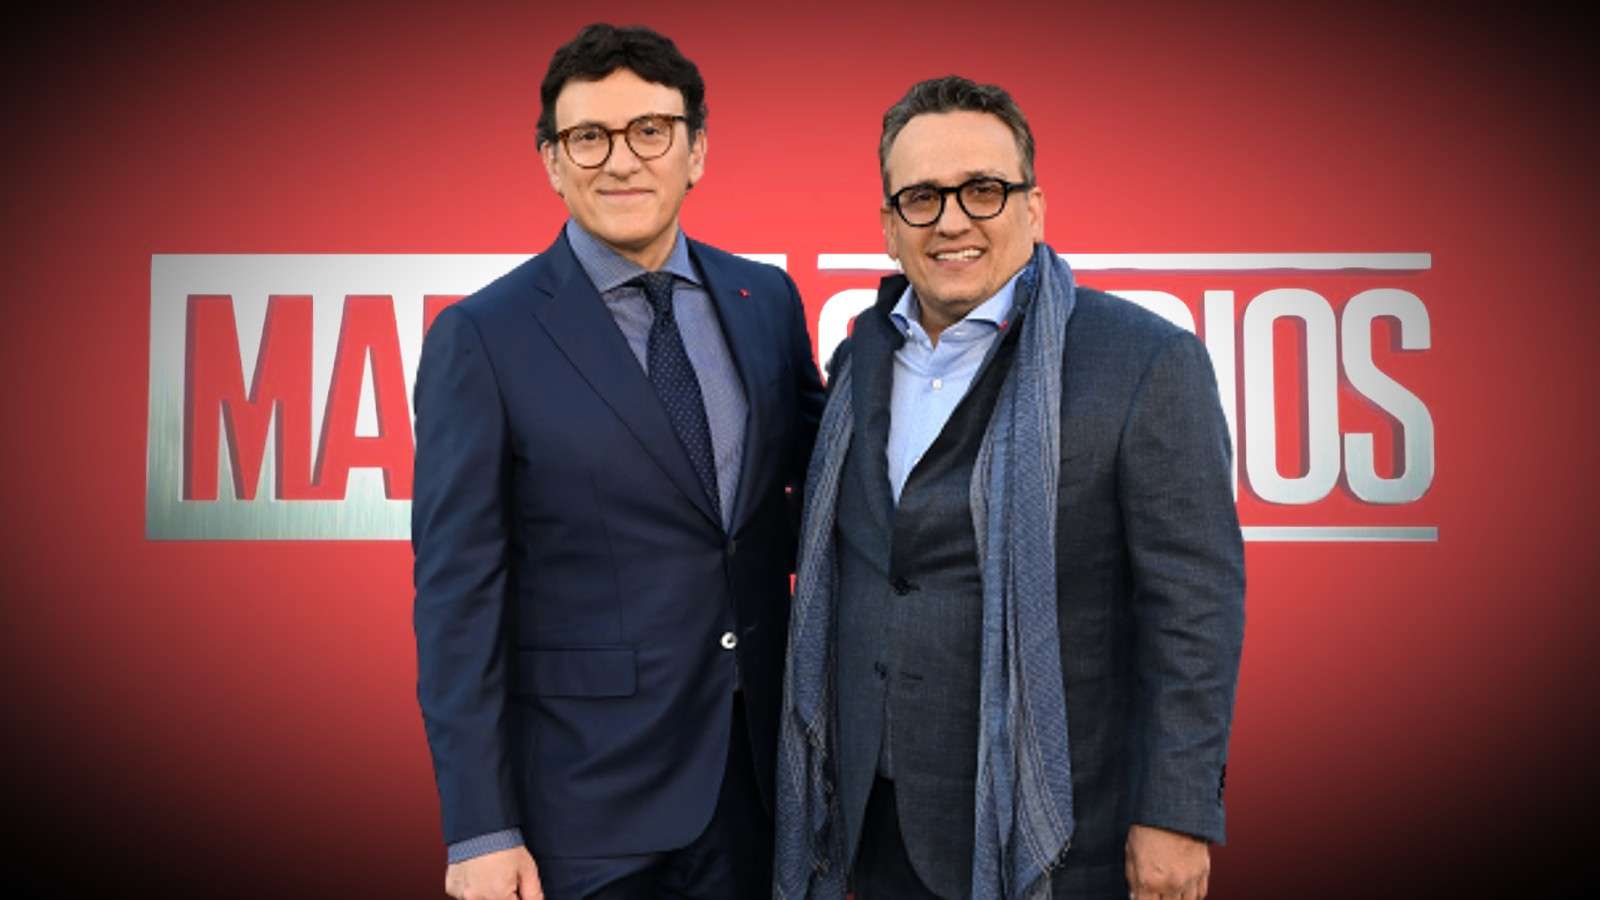 Russo Brothers in front of the MCU logo